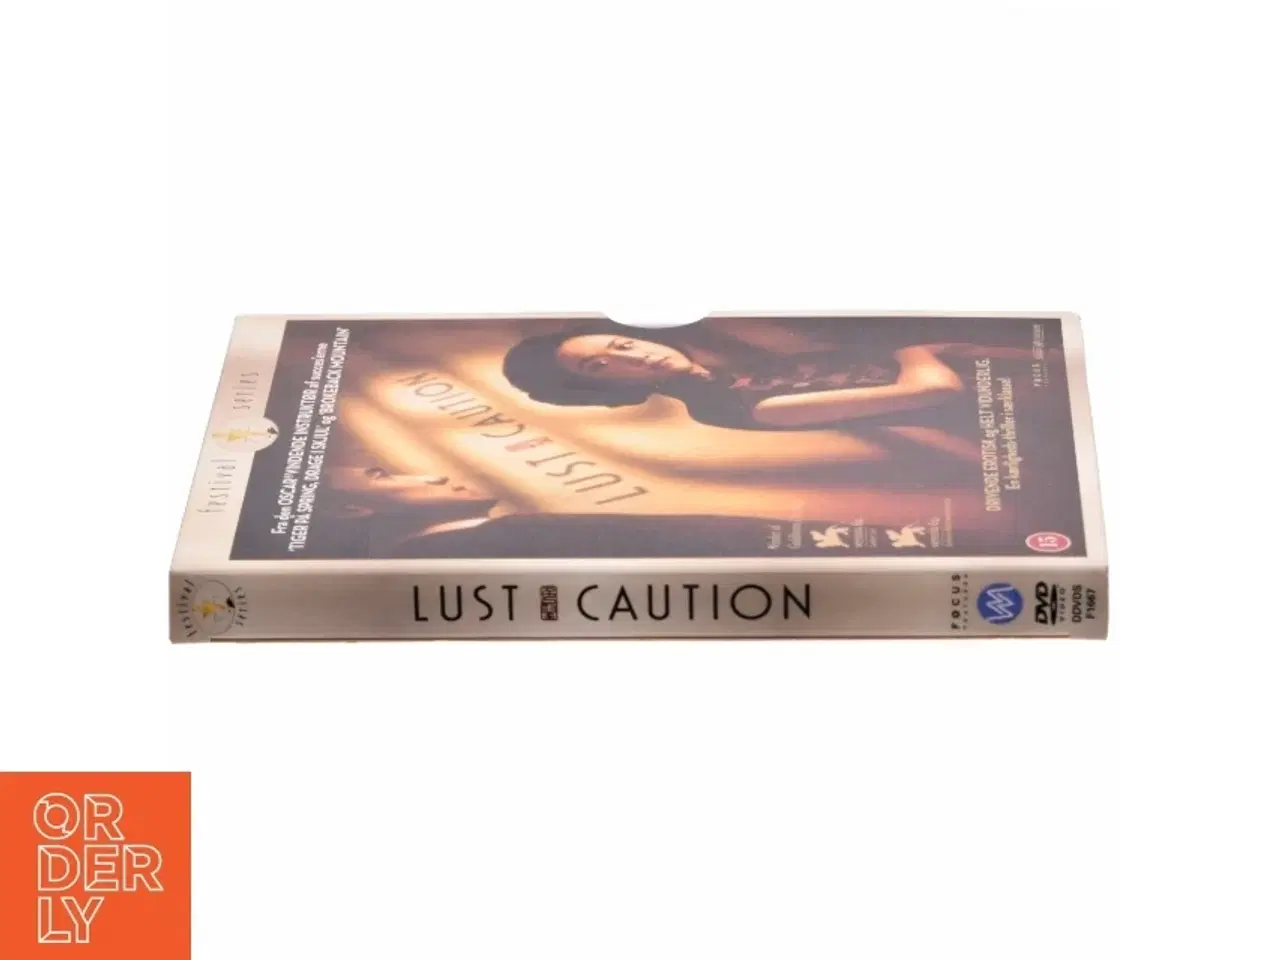 Billede 2 - Lust and Caution